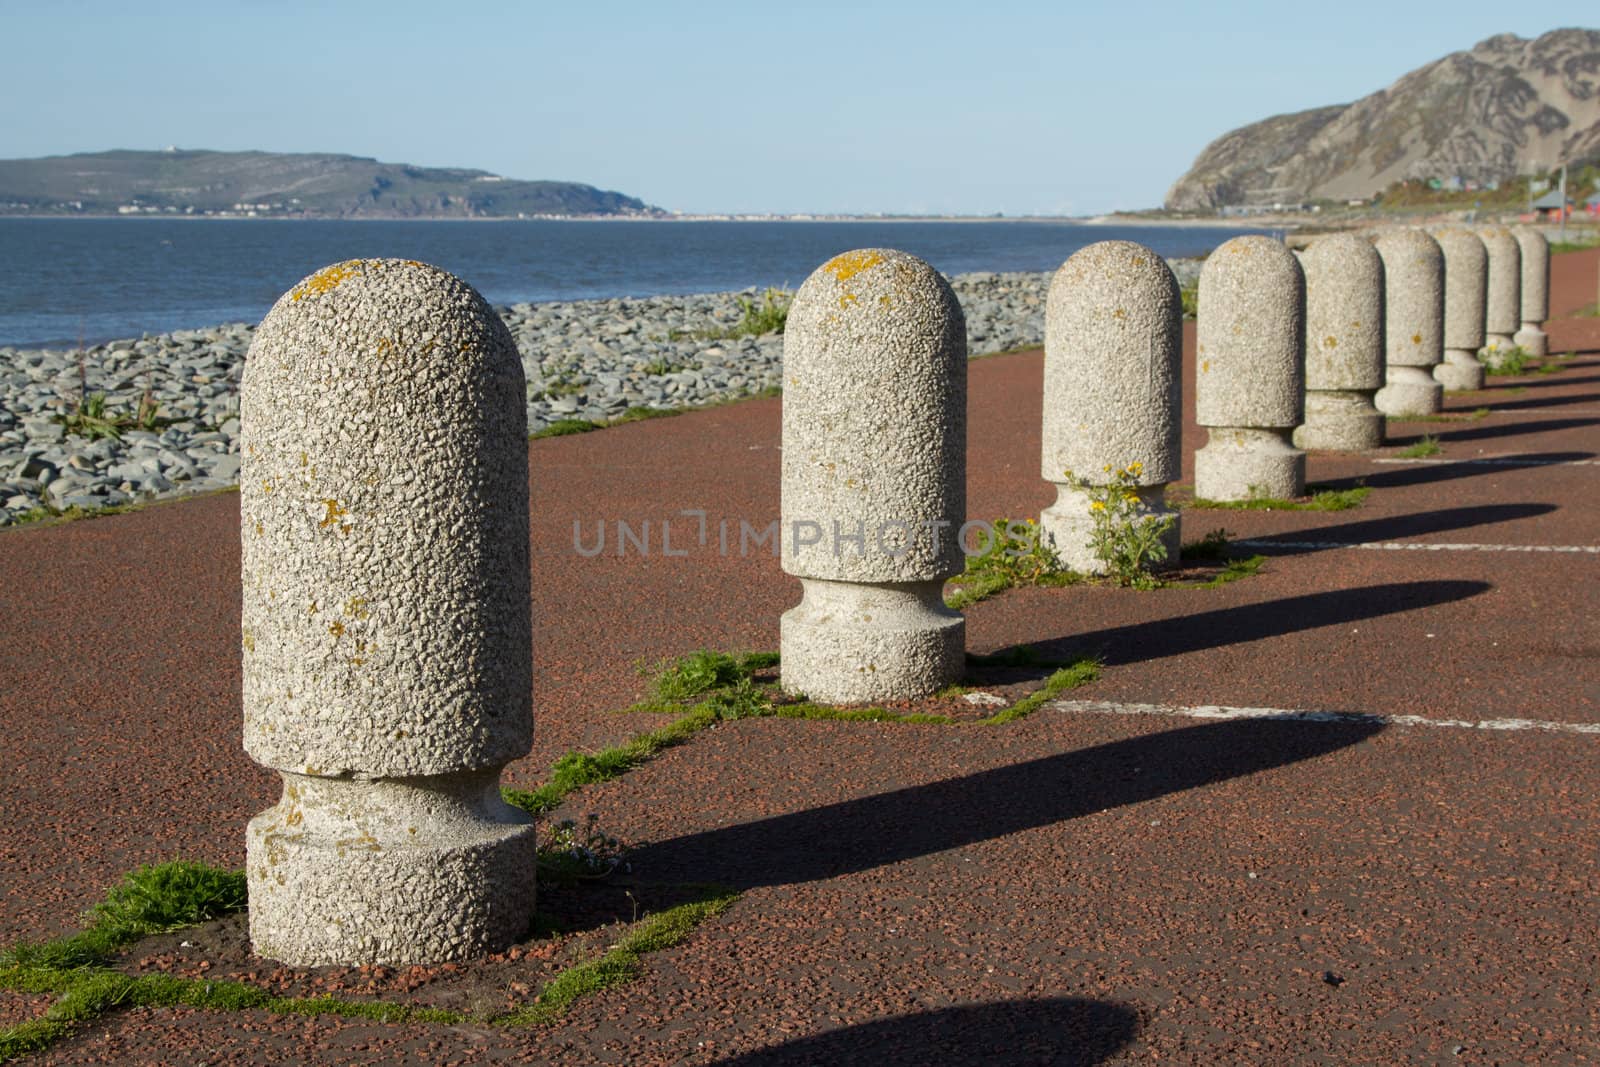 A set of concrete precast parking bollards stretch into the distance with a path, pebble beach and the sea in the distance.